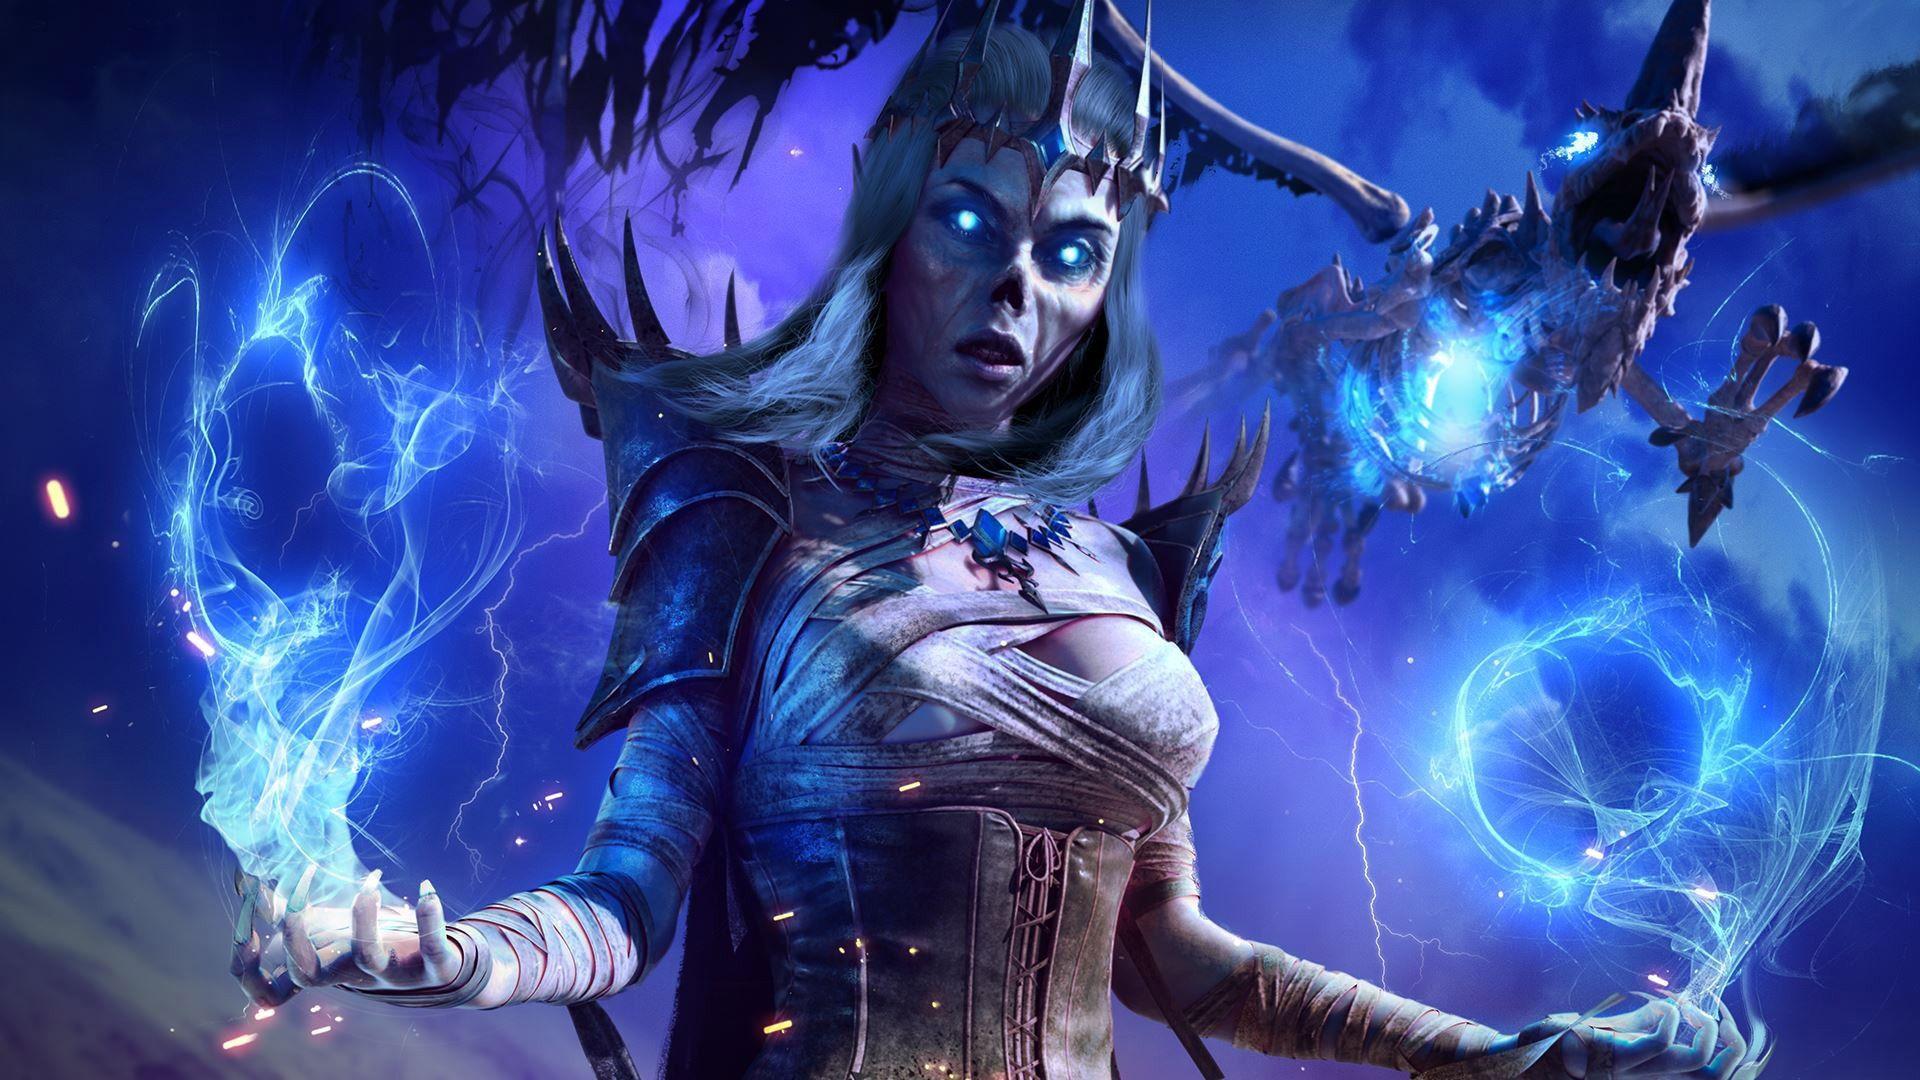 neverwinter download free